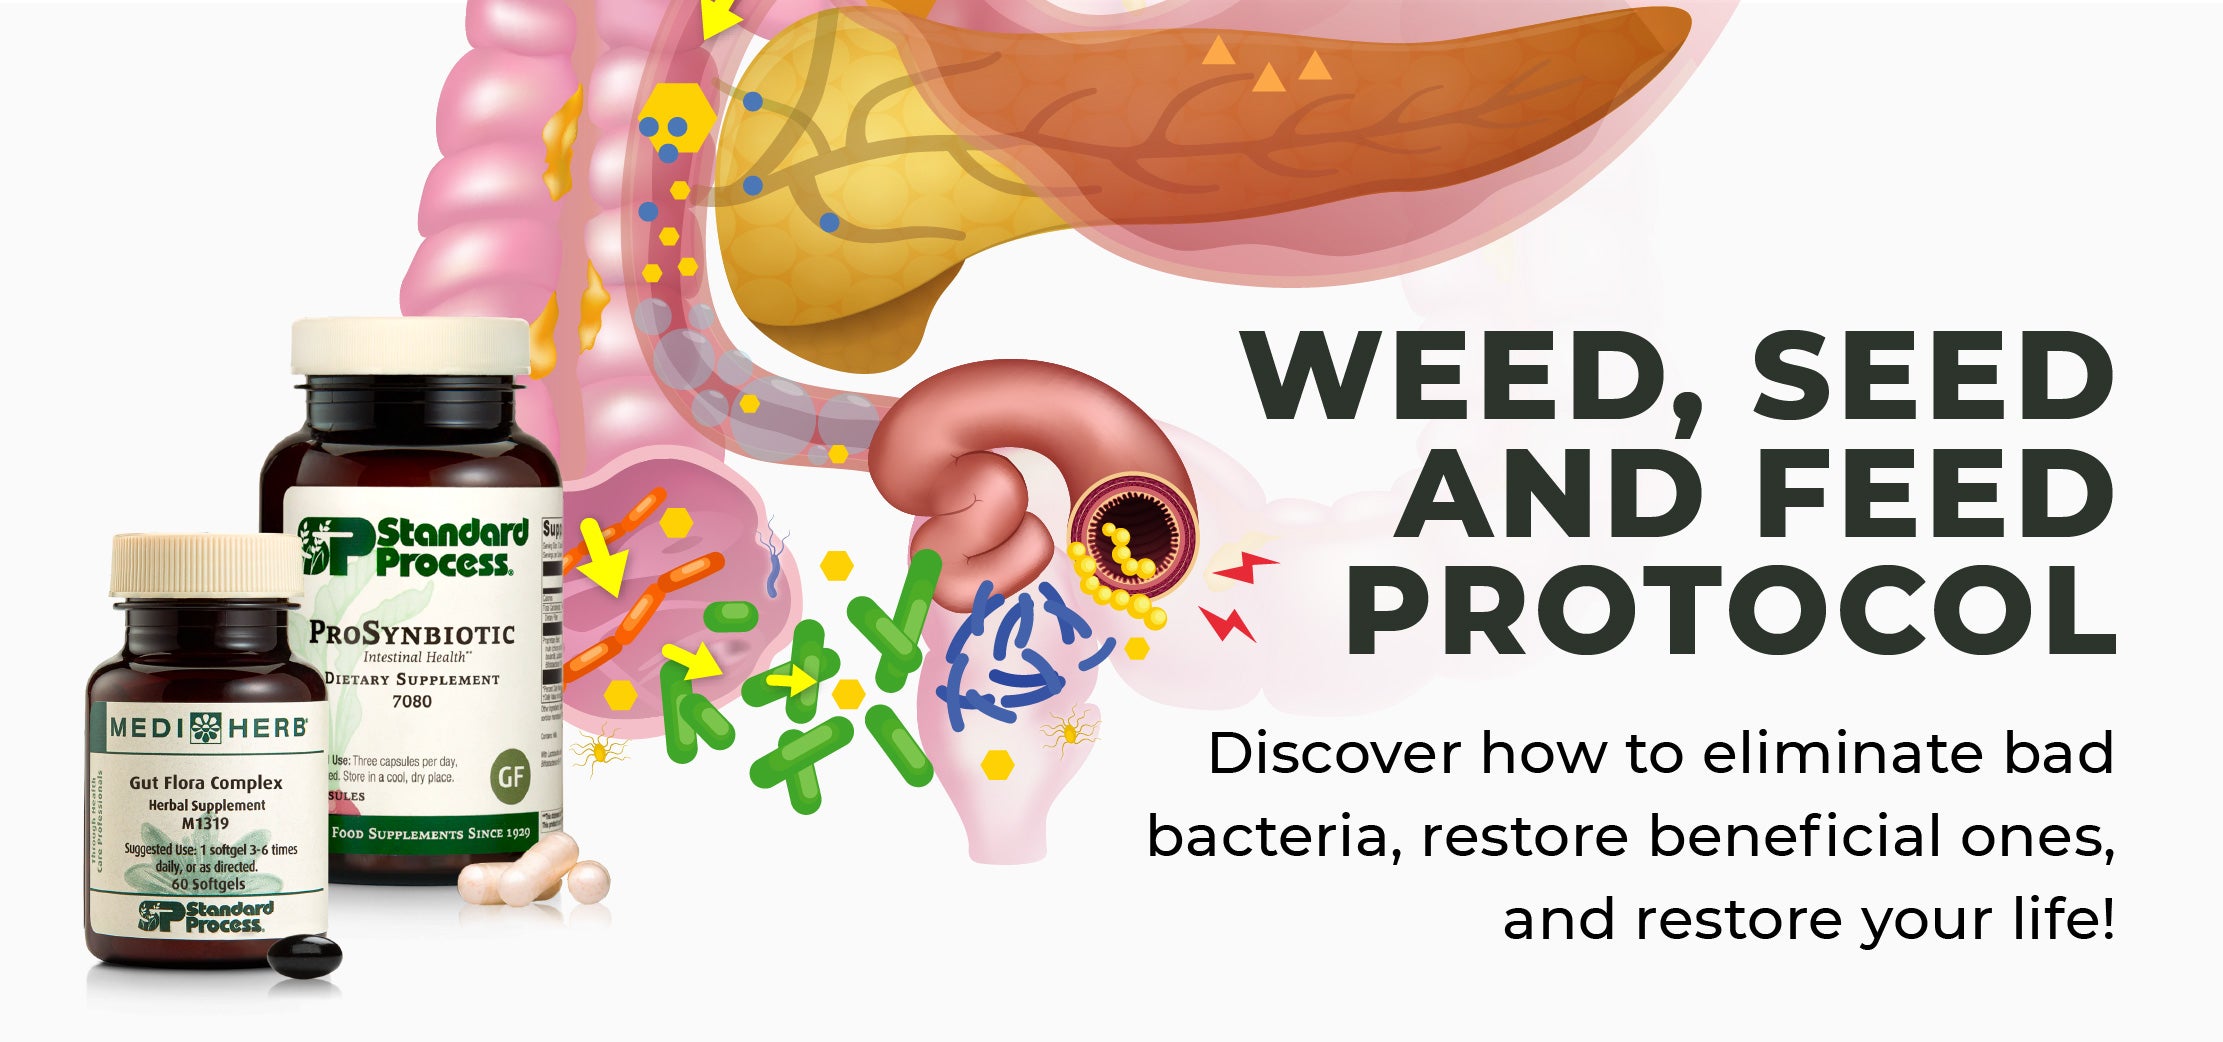 'Weed, Seed, and Feed' Protocol with MediHerb and Standard Process